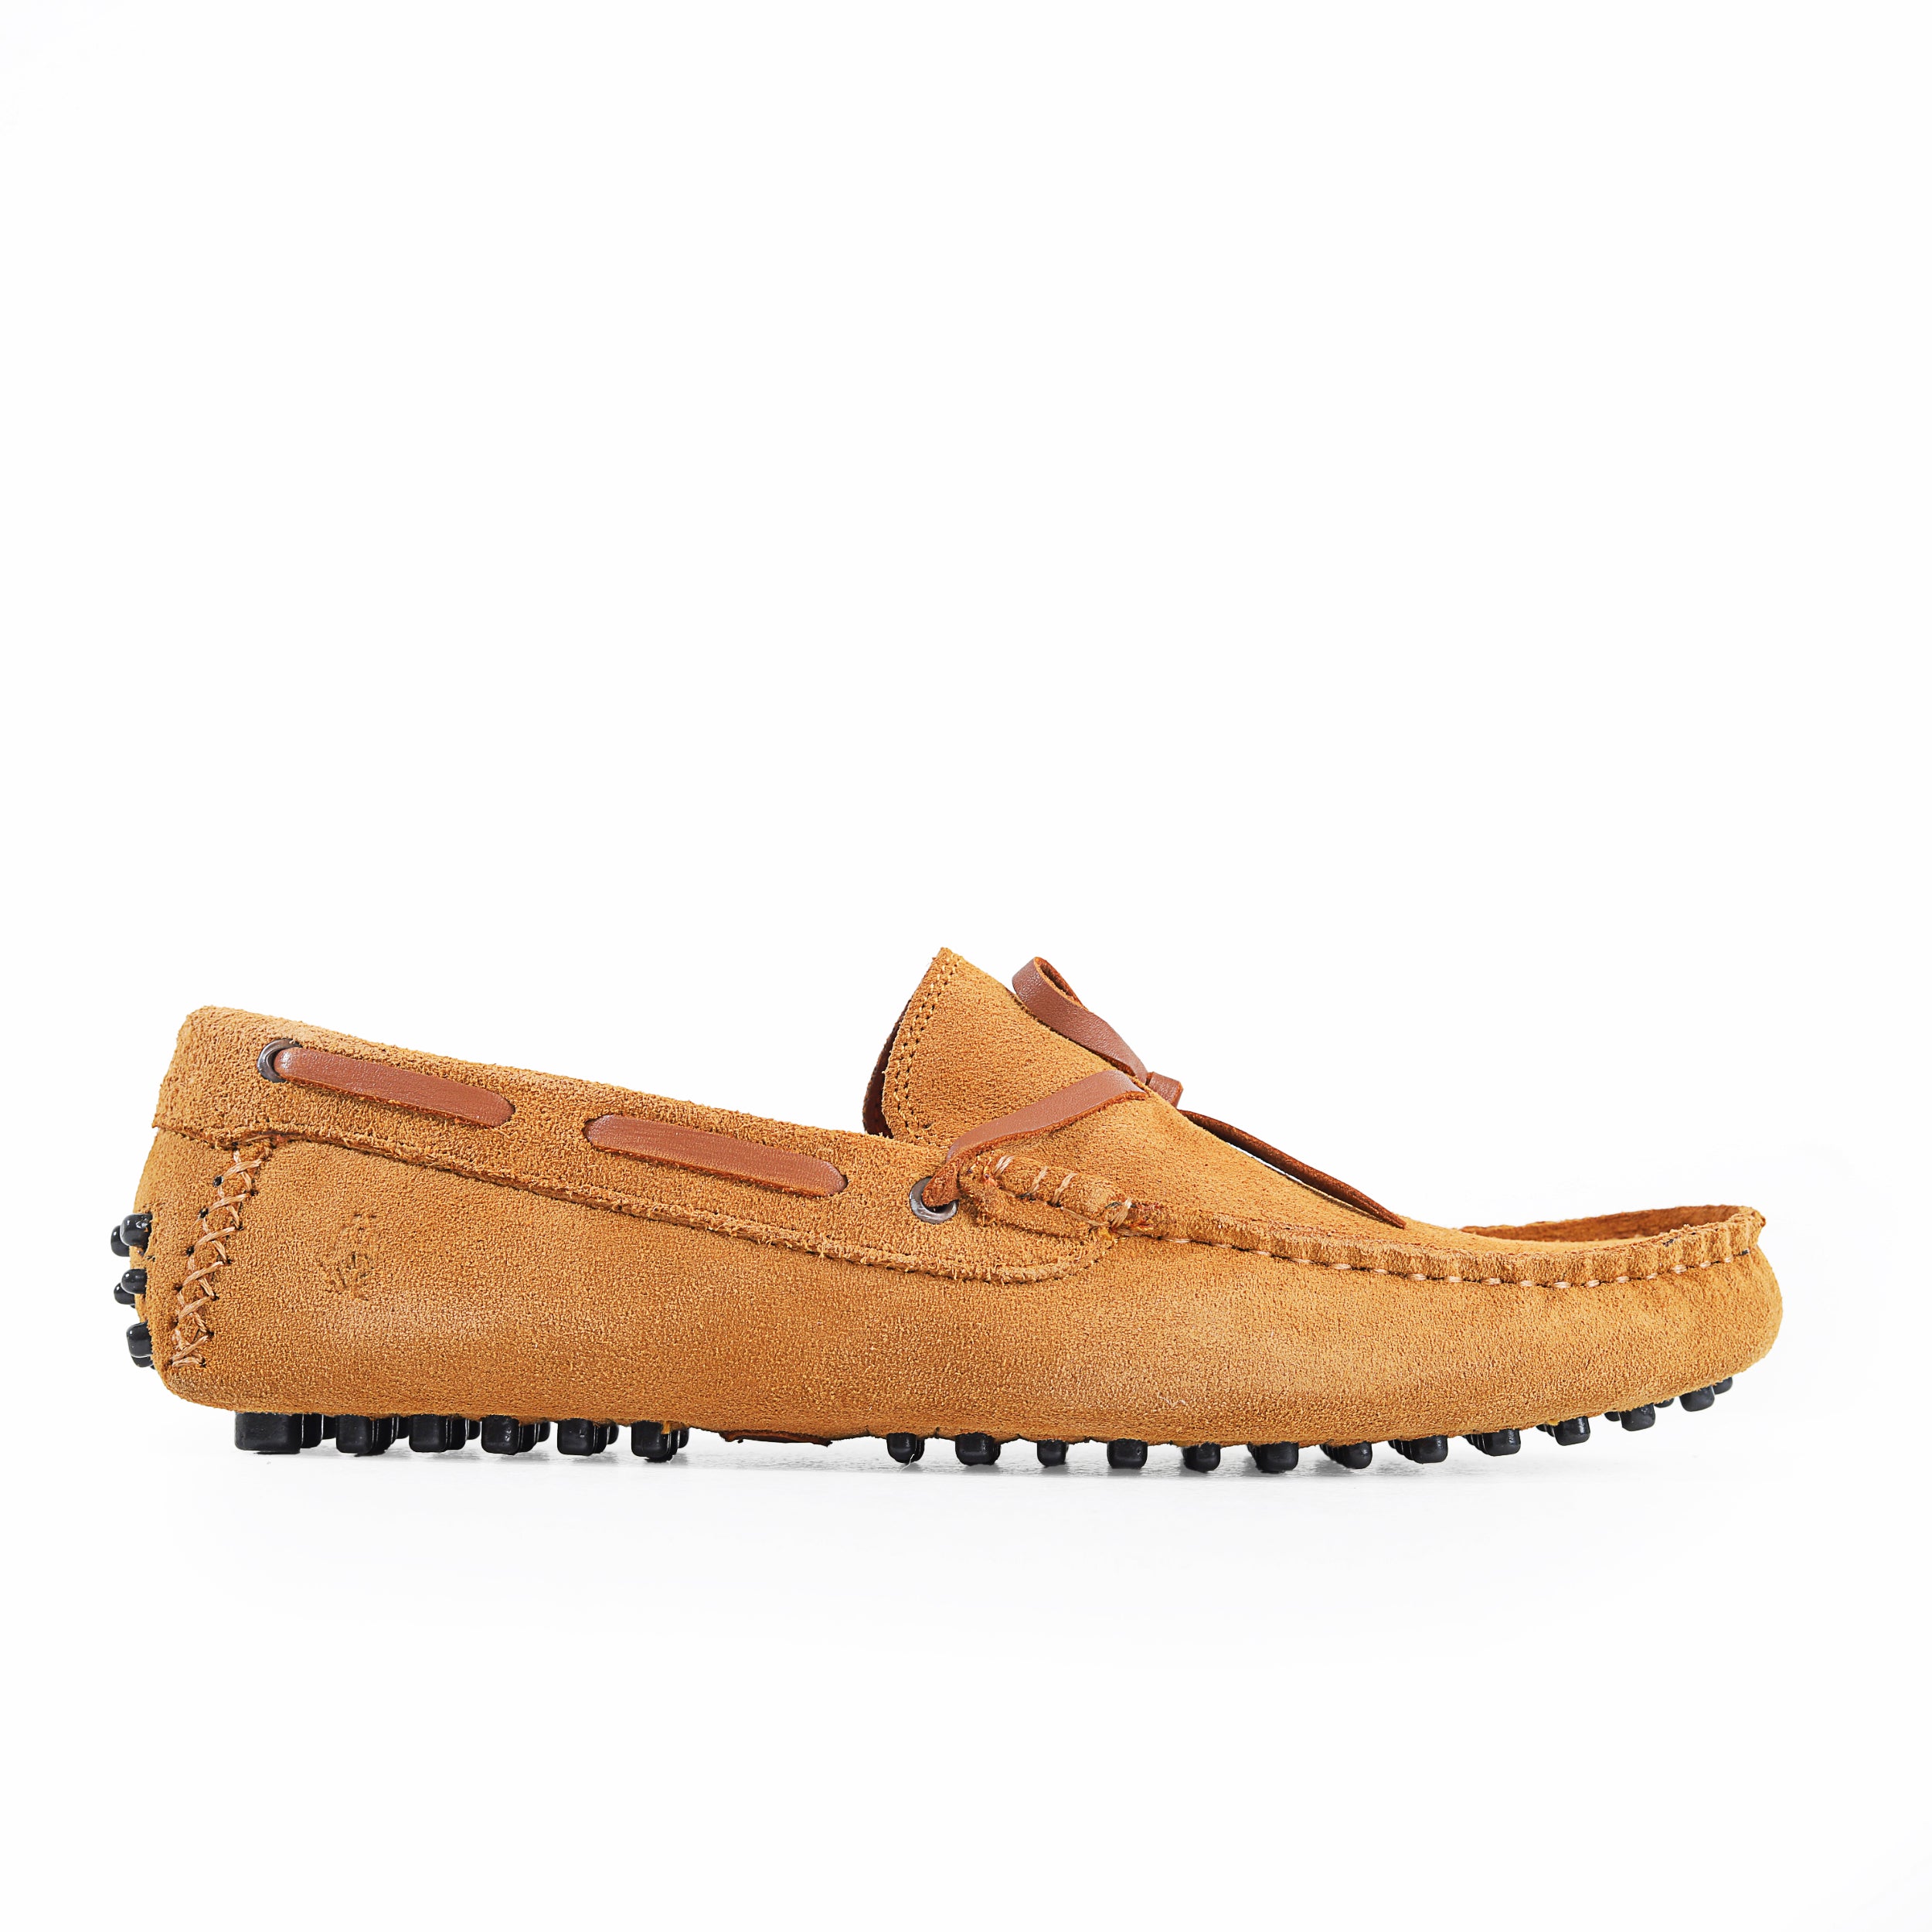 Hush Puppies Suede Loafers Shoes 4906